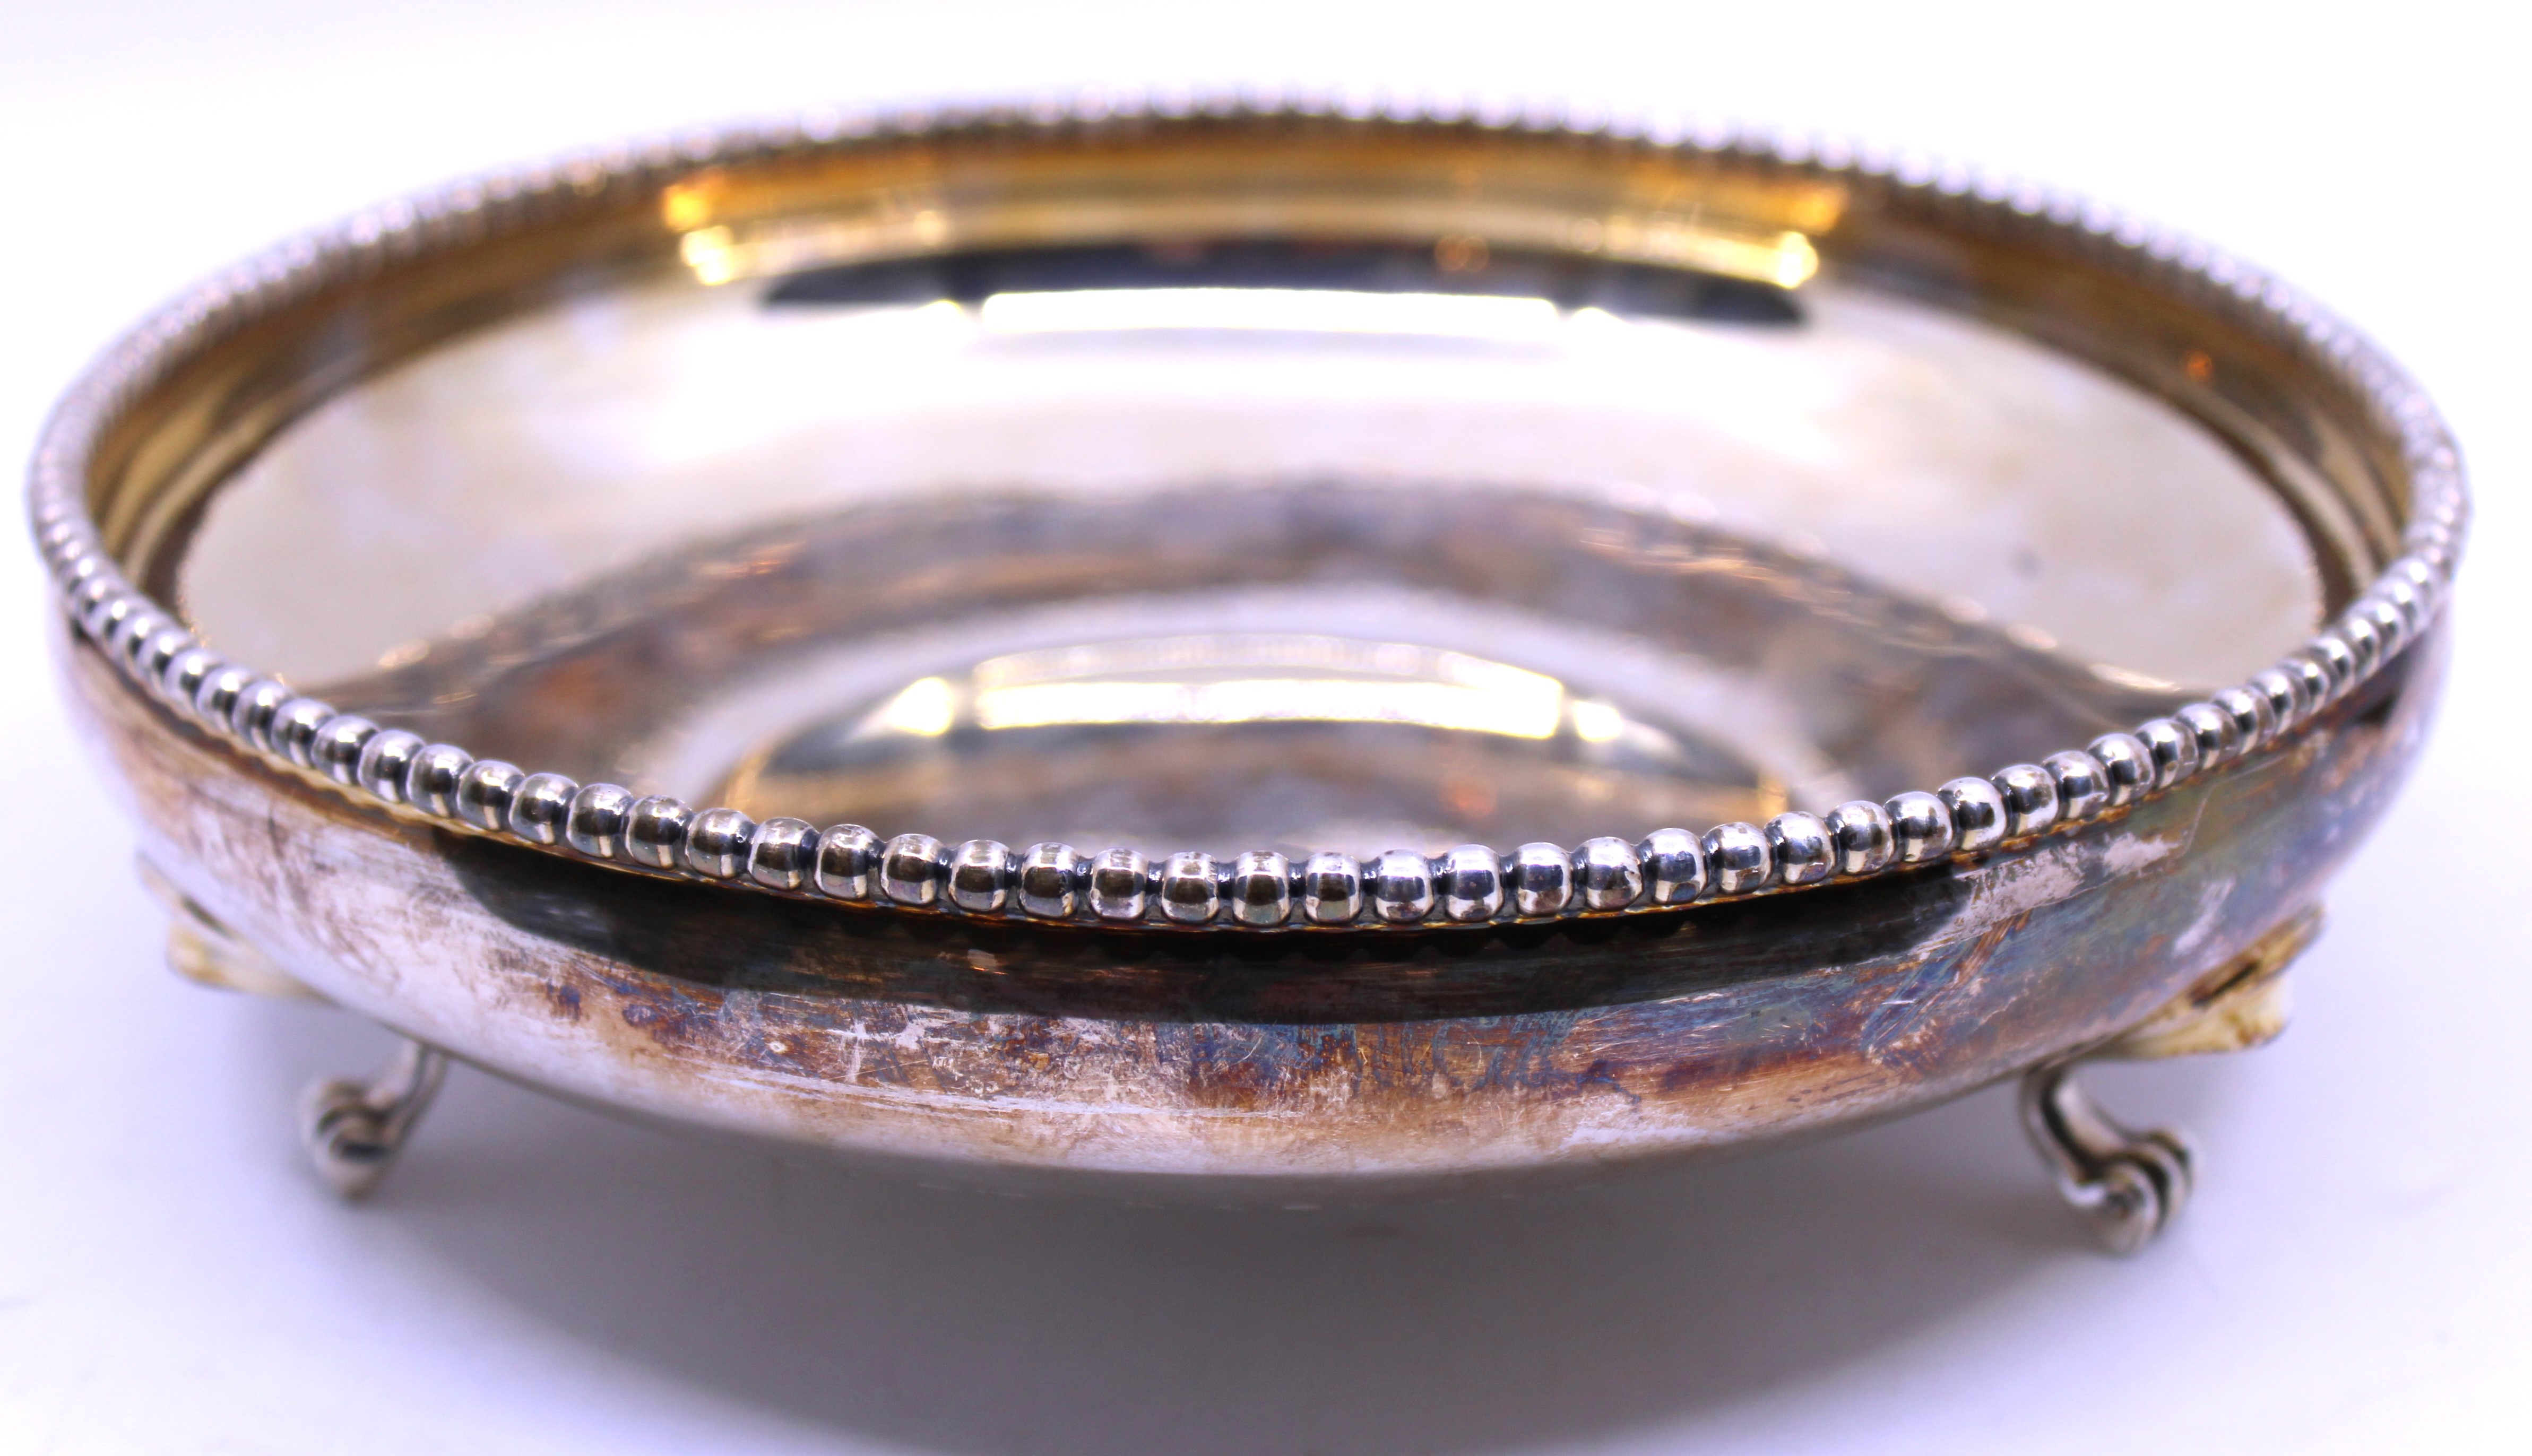 Norwegian Sterling Silver Three-Footed Bowl with beaded rim. The Bowl is engraved "HELGE AASLAND